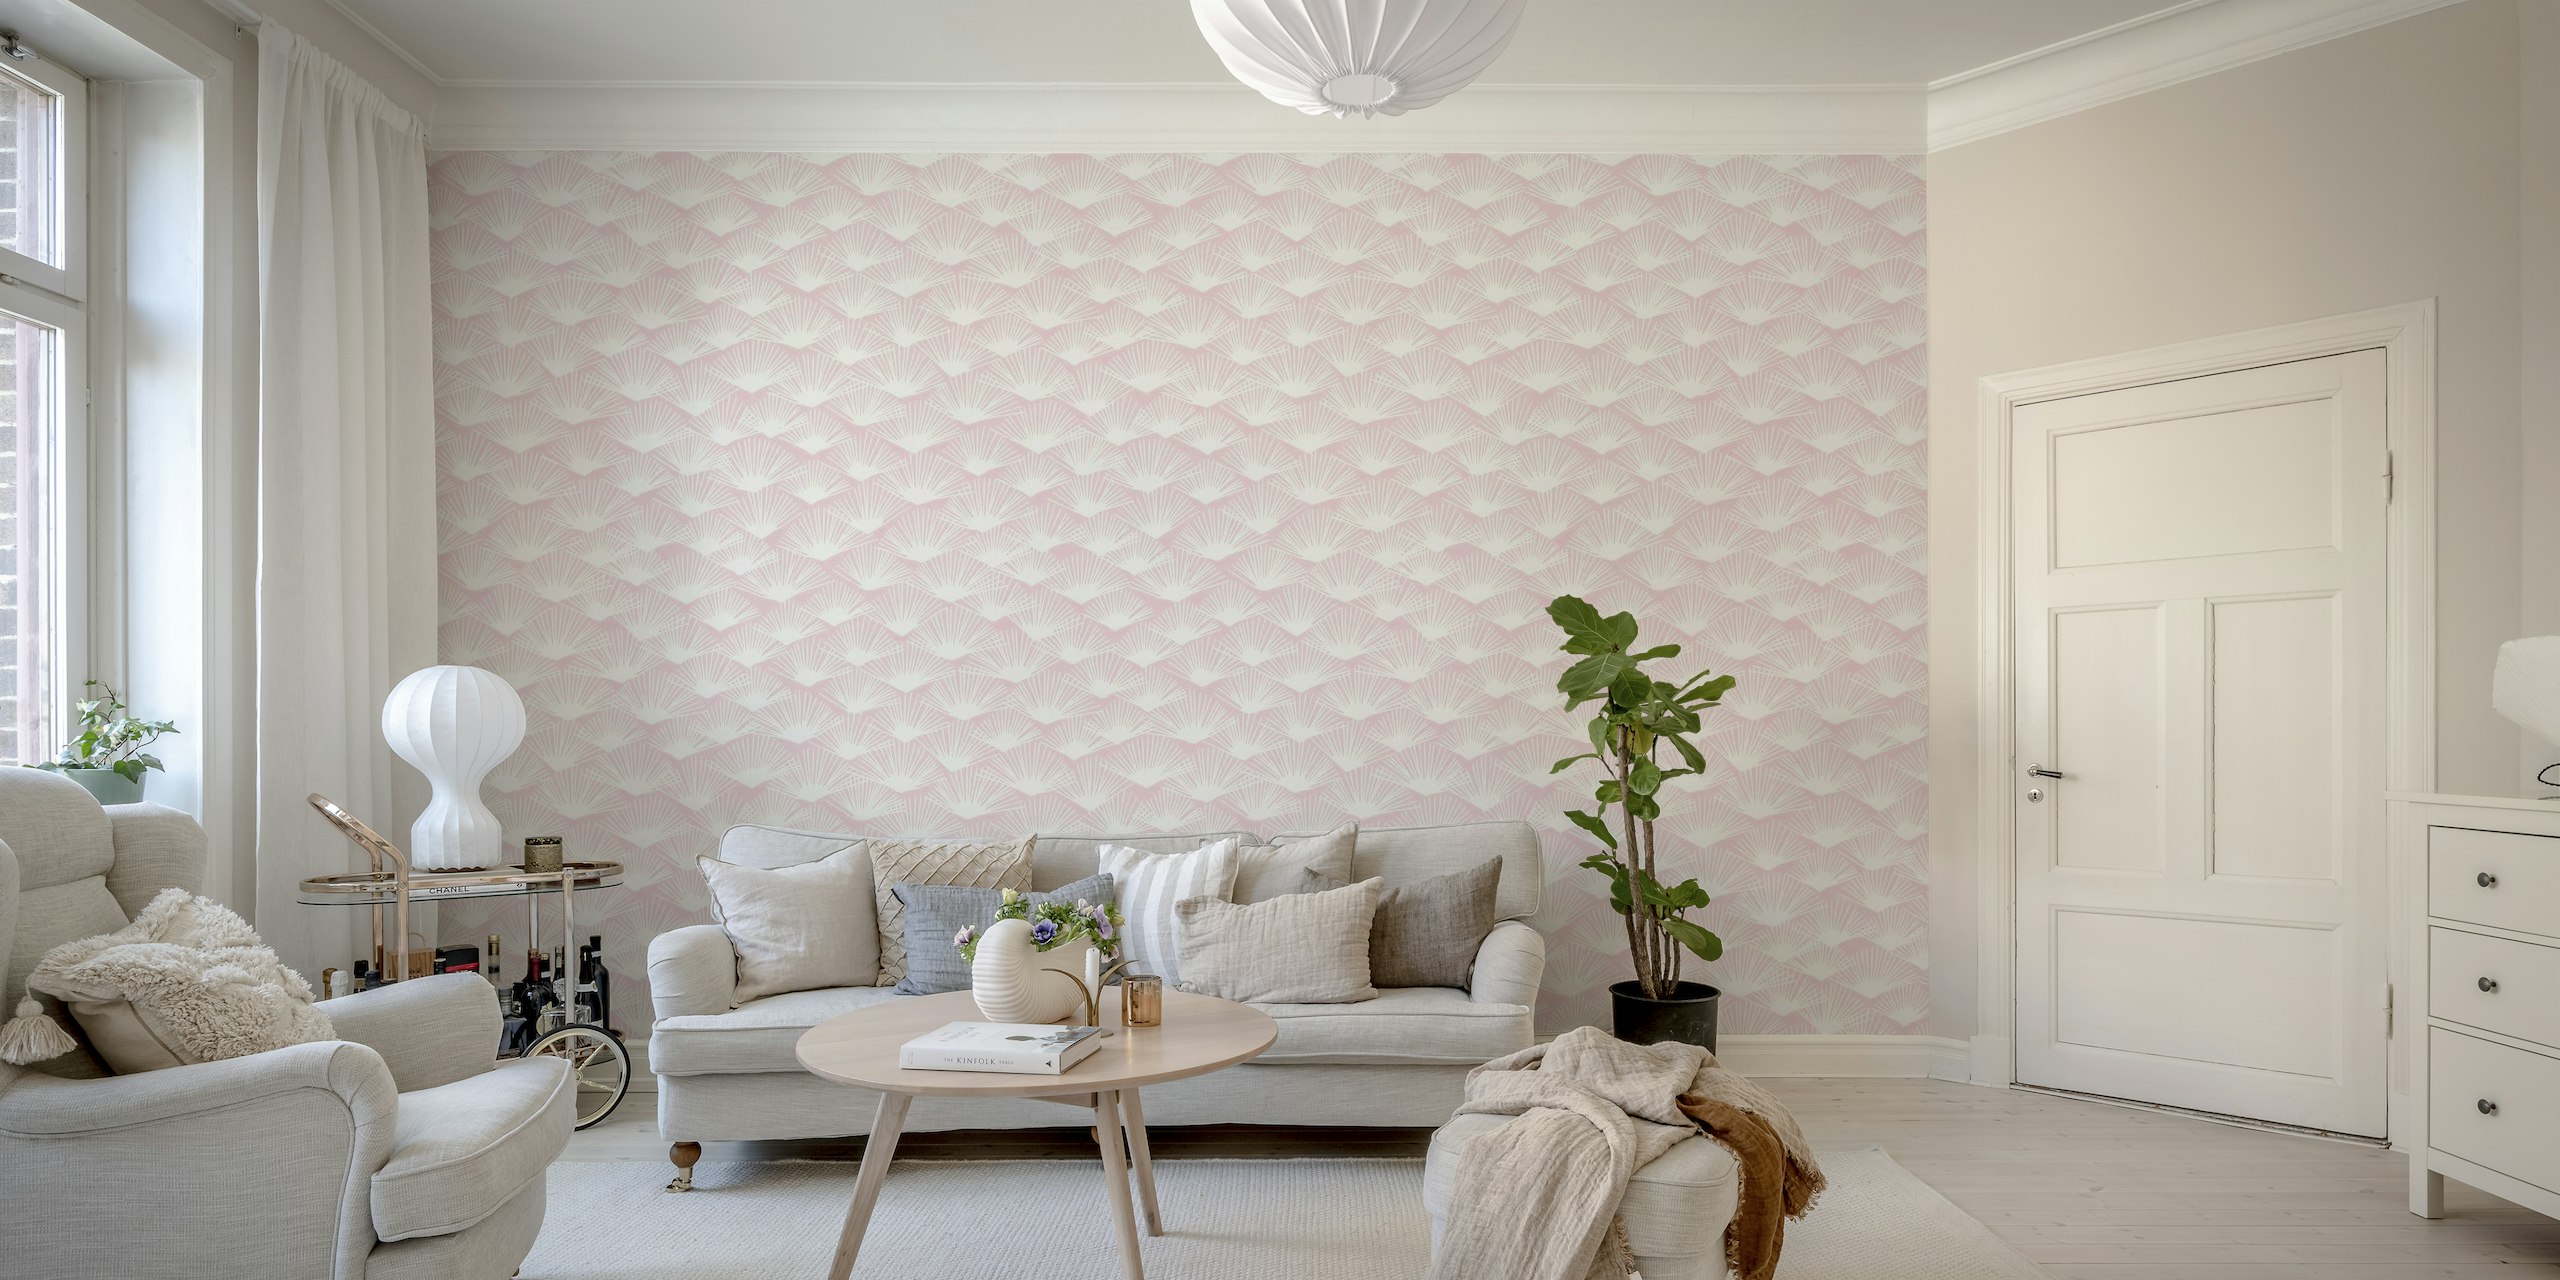 Abstract palm leaf pattern in rose quartz pink shades wall mural